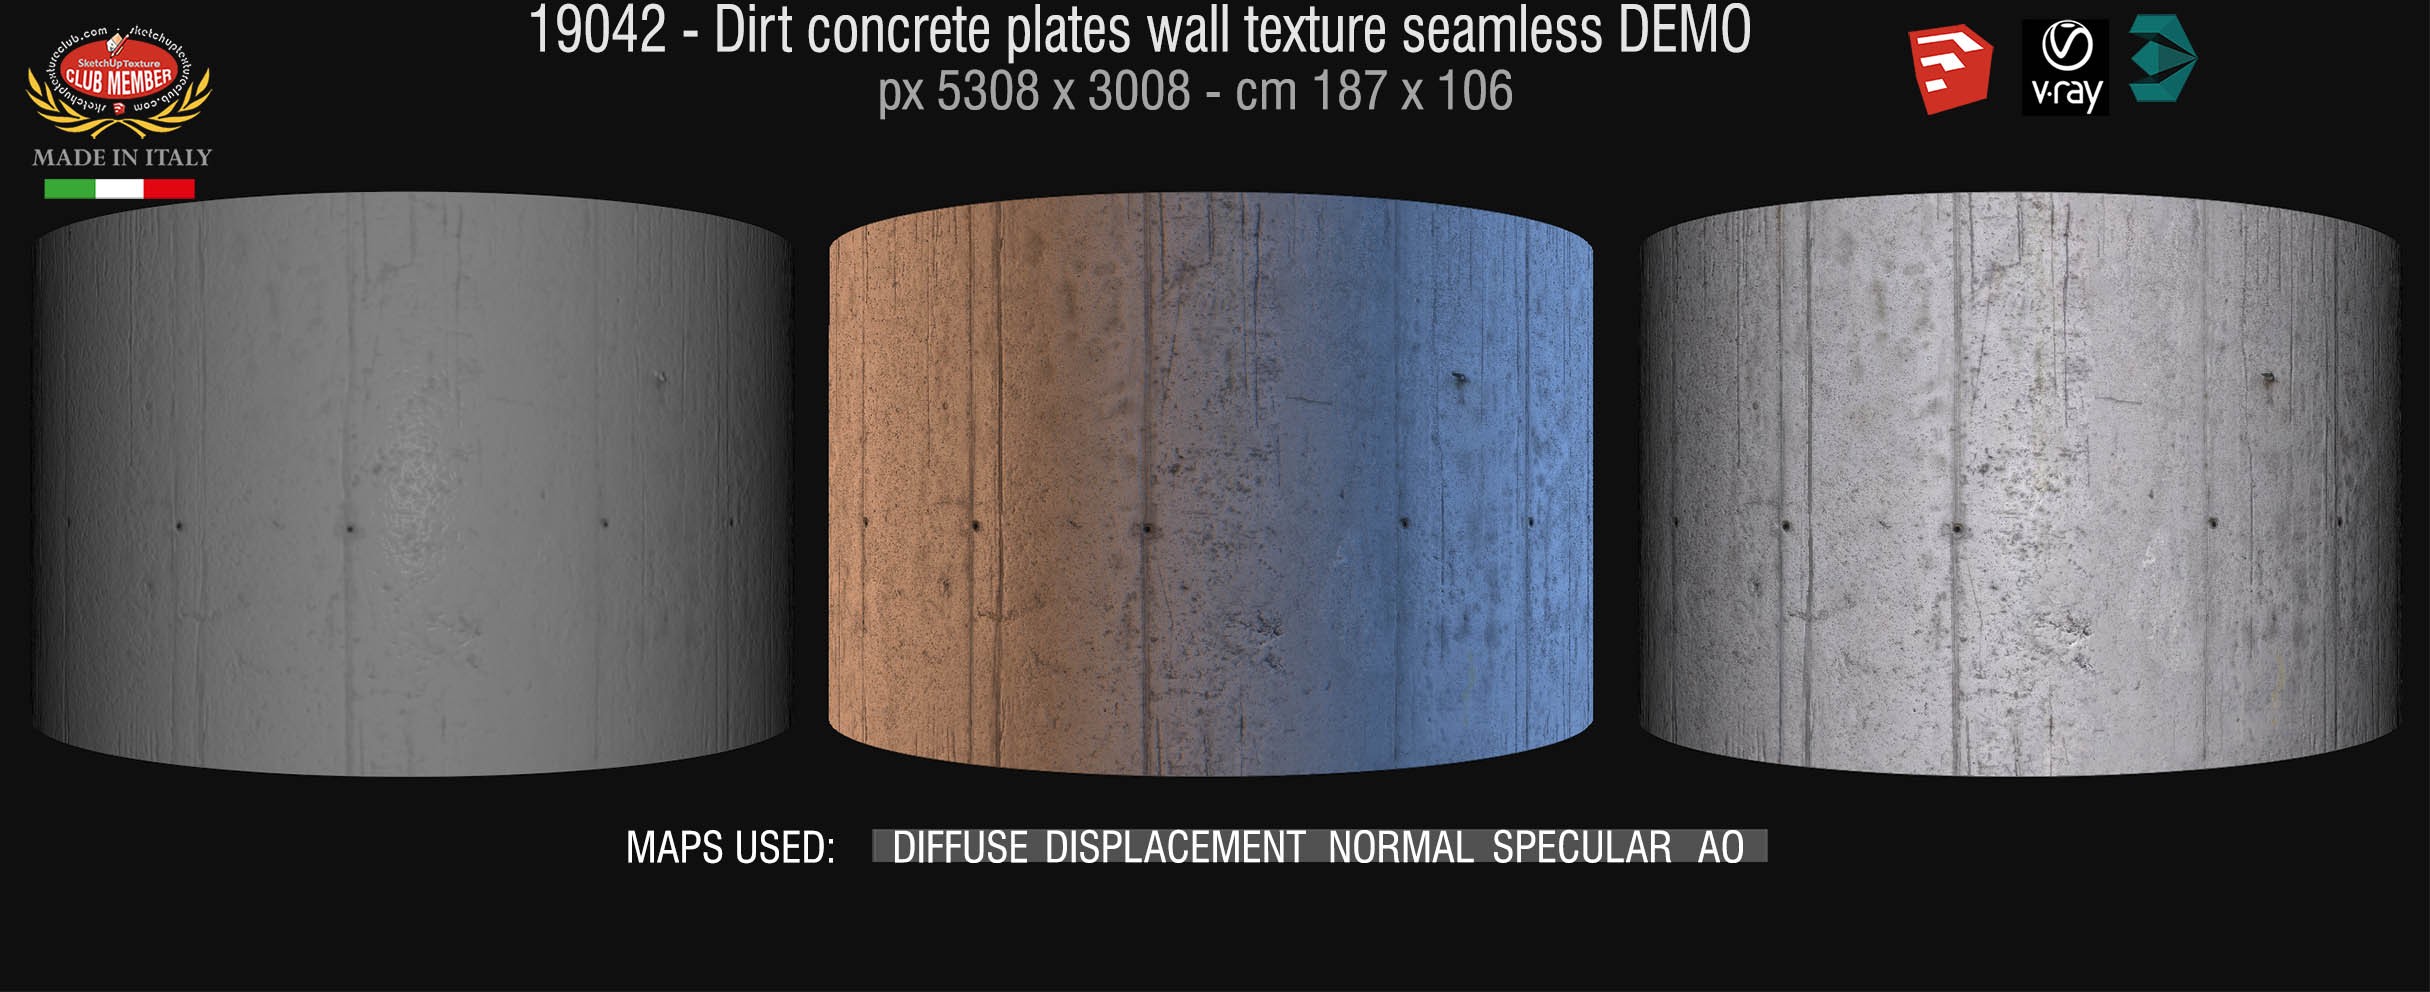 19042 Dirty concrete plates wall texture seamless + maps DEMO